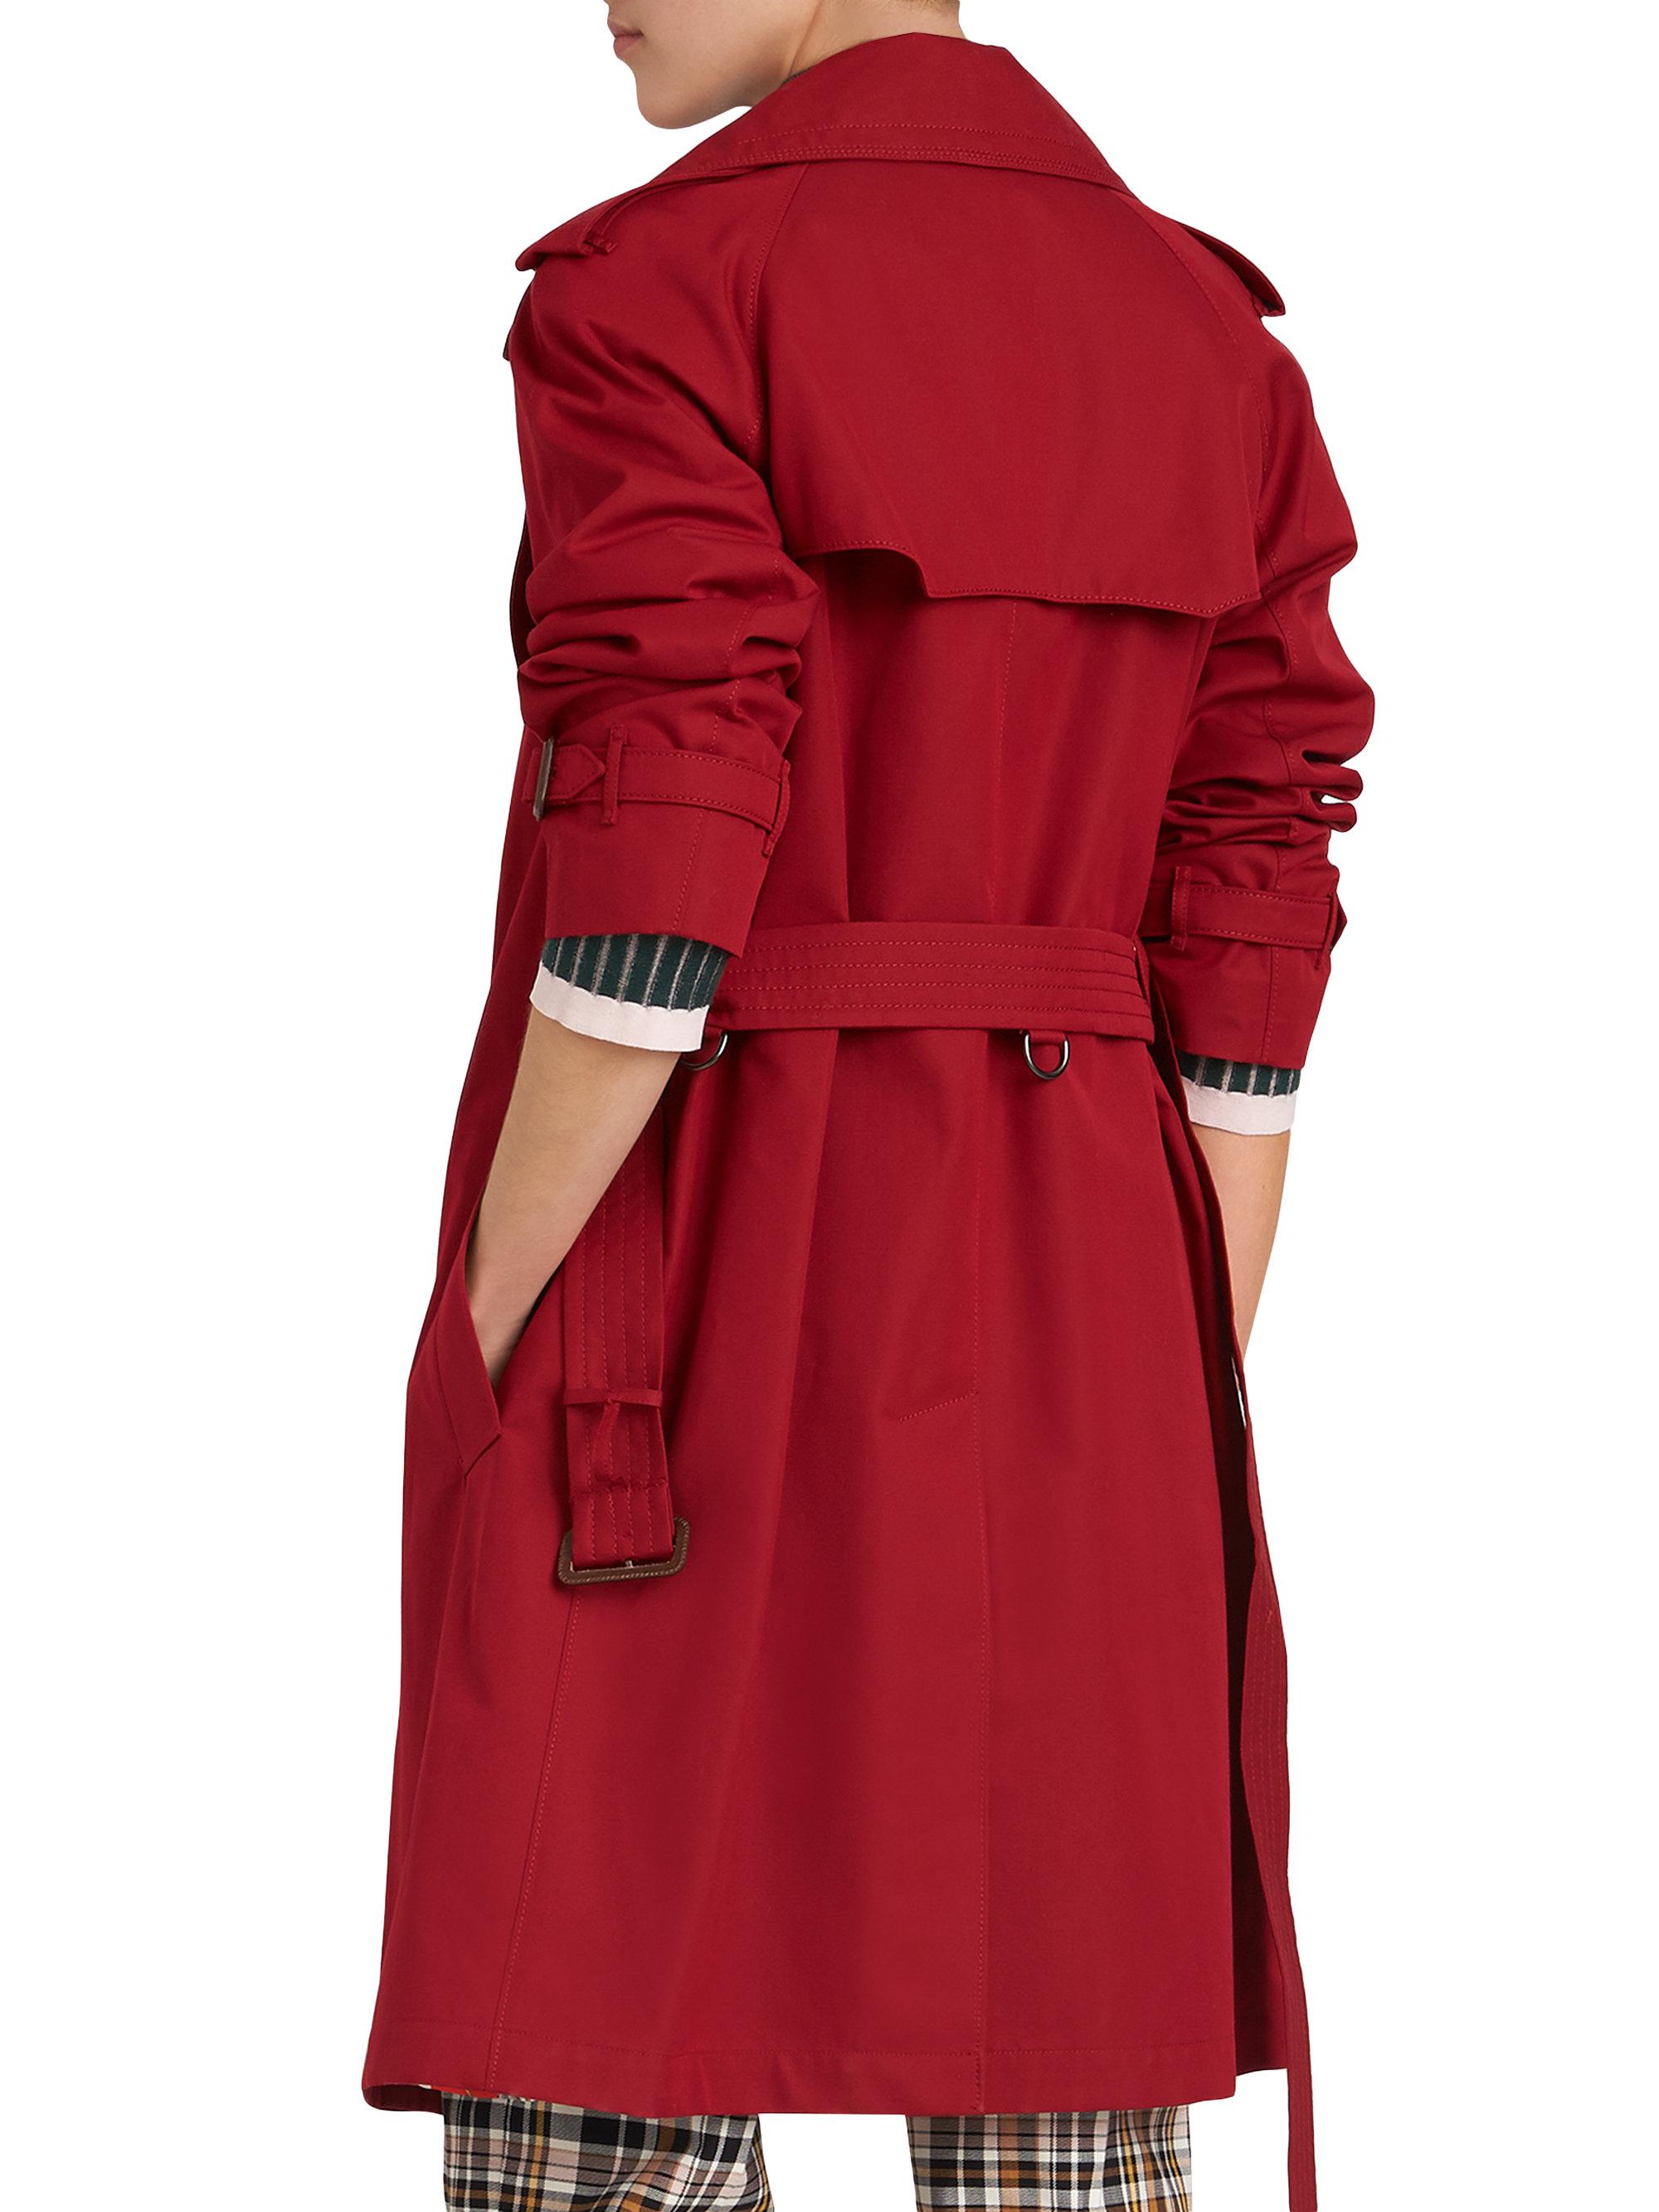 Burberry Cotton Crambeck Trench Coat in 